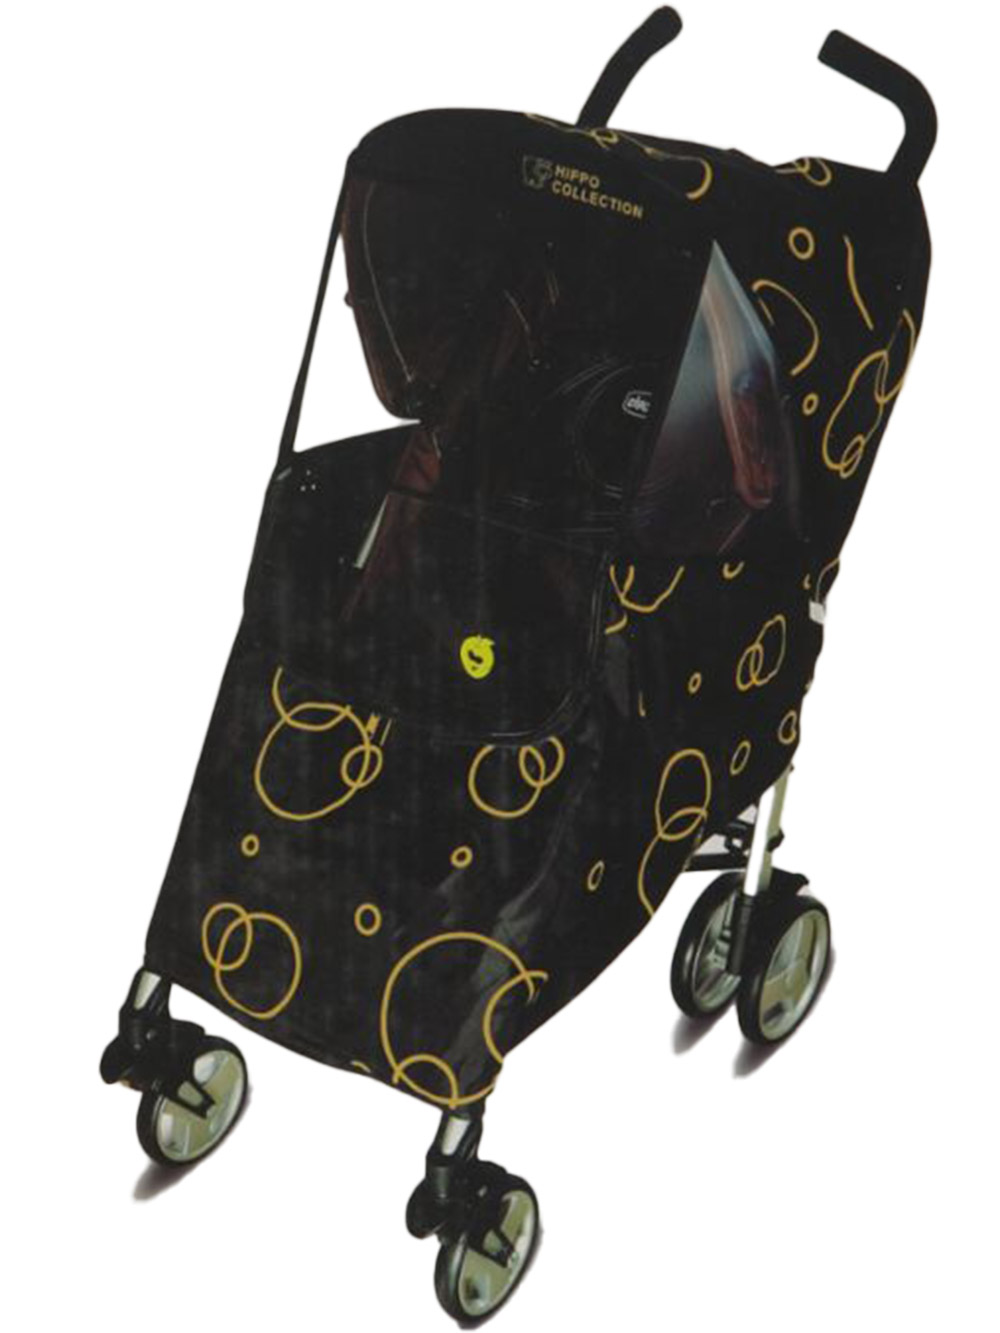 weather shield for strollers